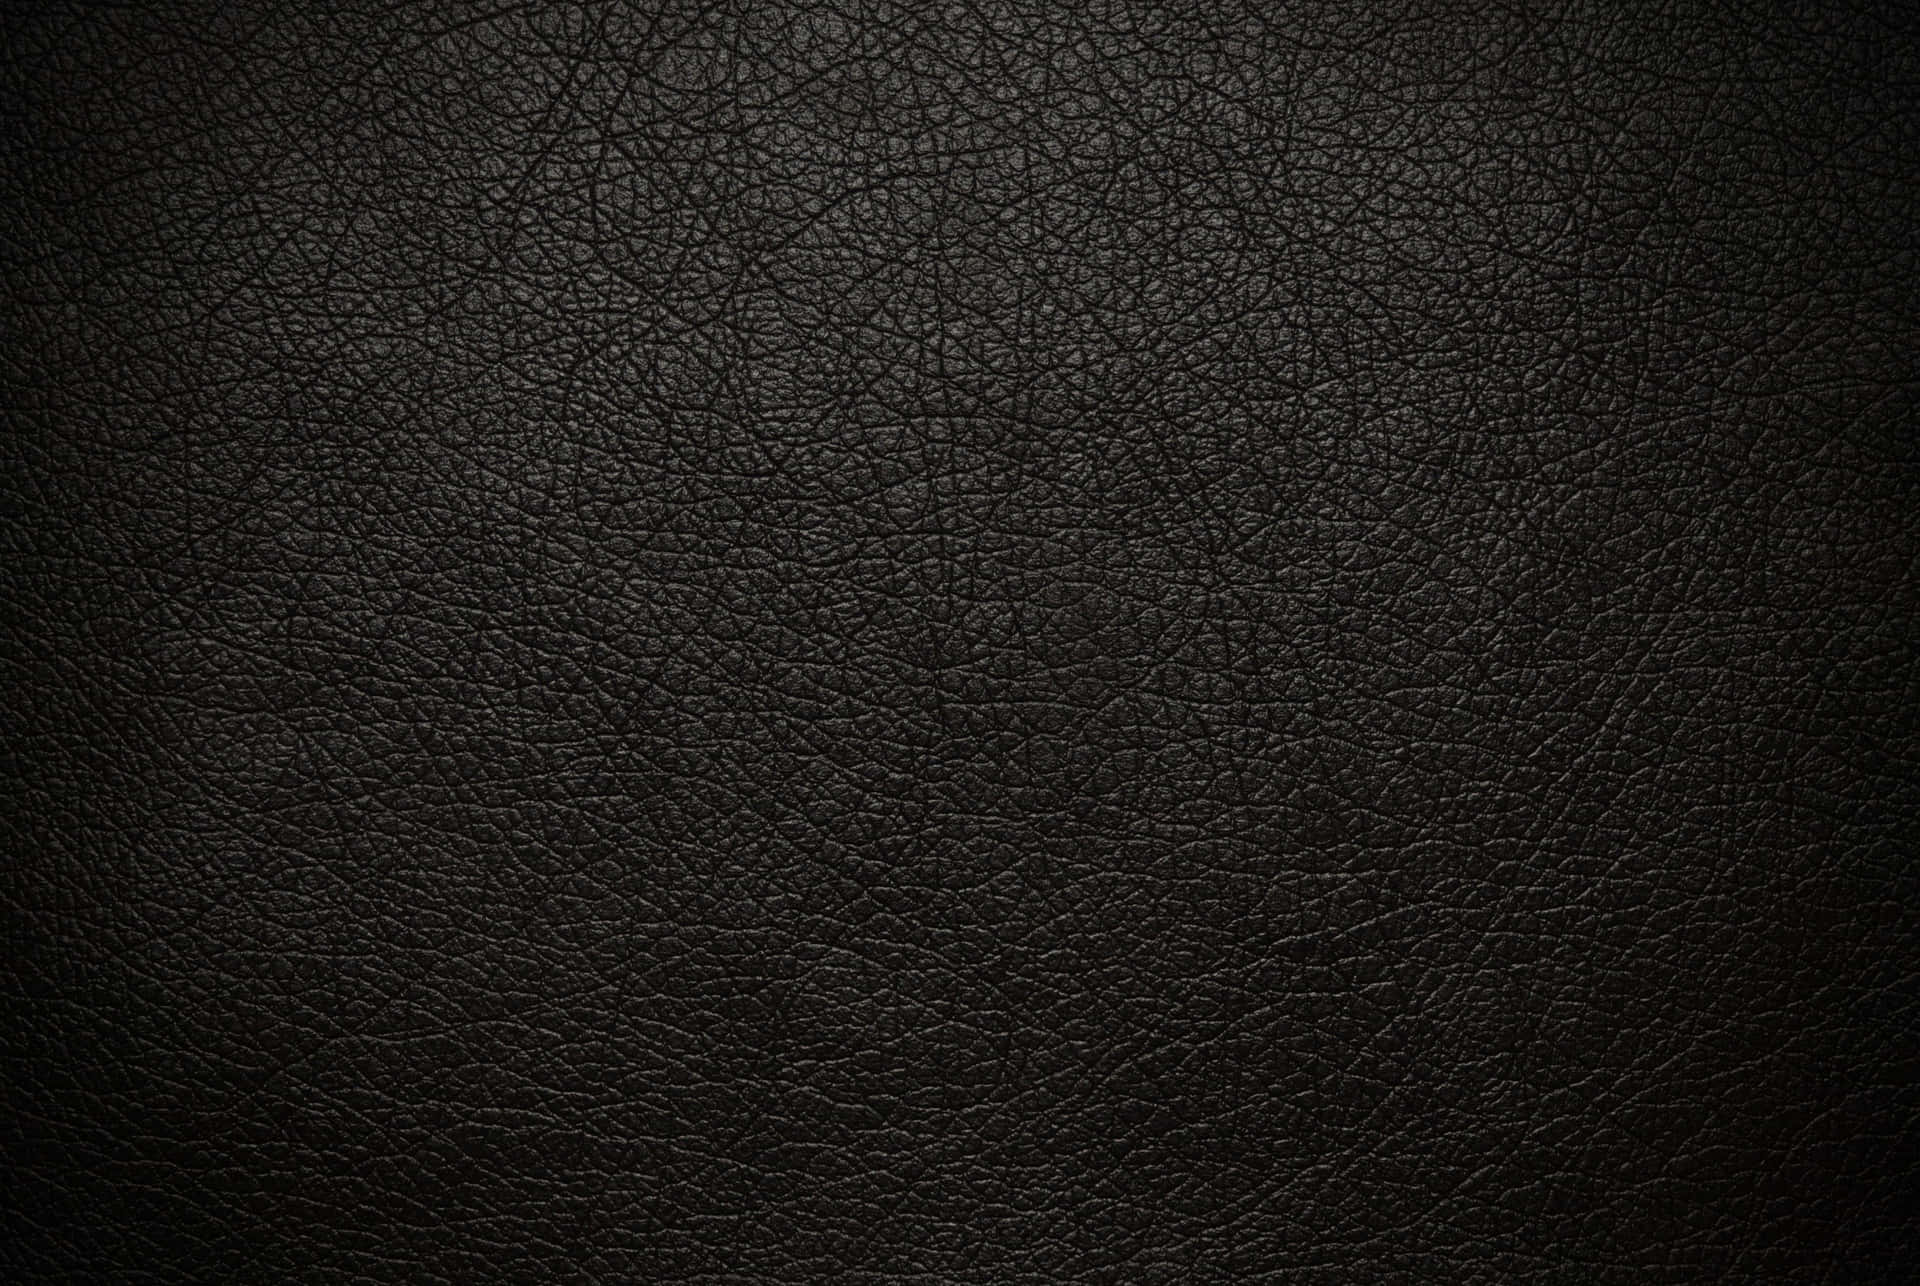 Intricate Woven Texture Background